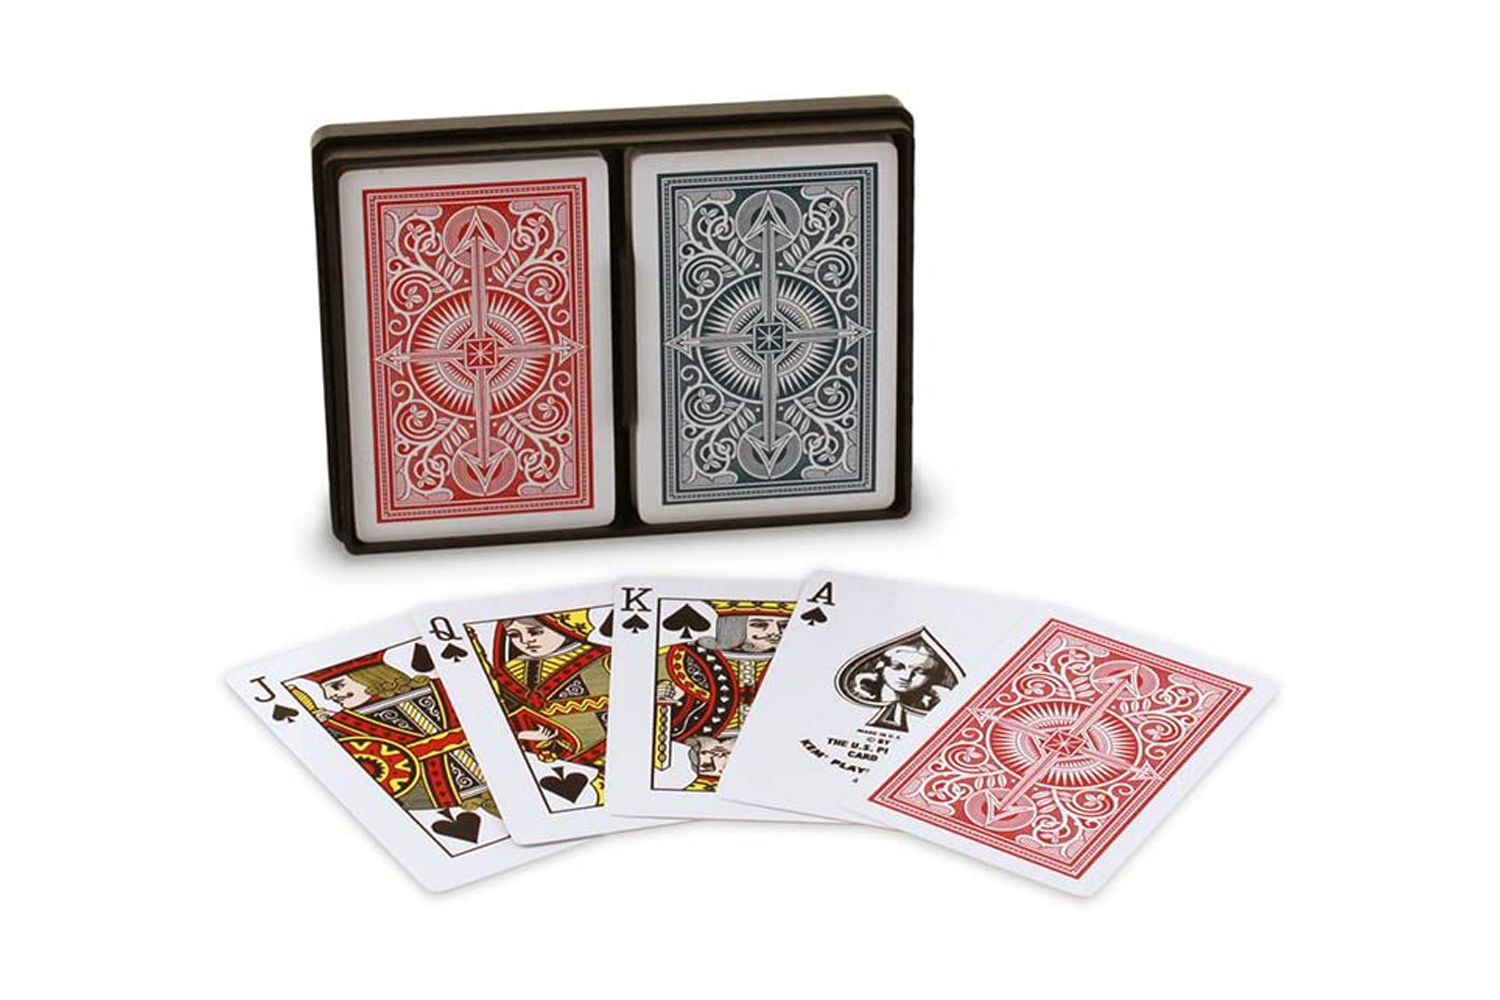 PLASTIC COATED PACKS DECK OF ORIGINAL TRADITIONAL CLASSIC STANDARD PLAYING CARDS 